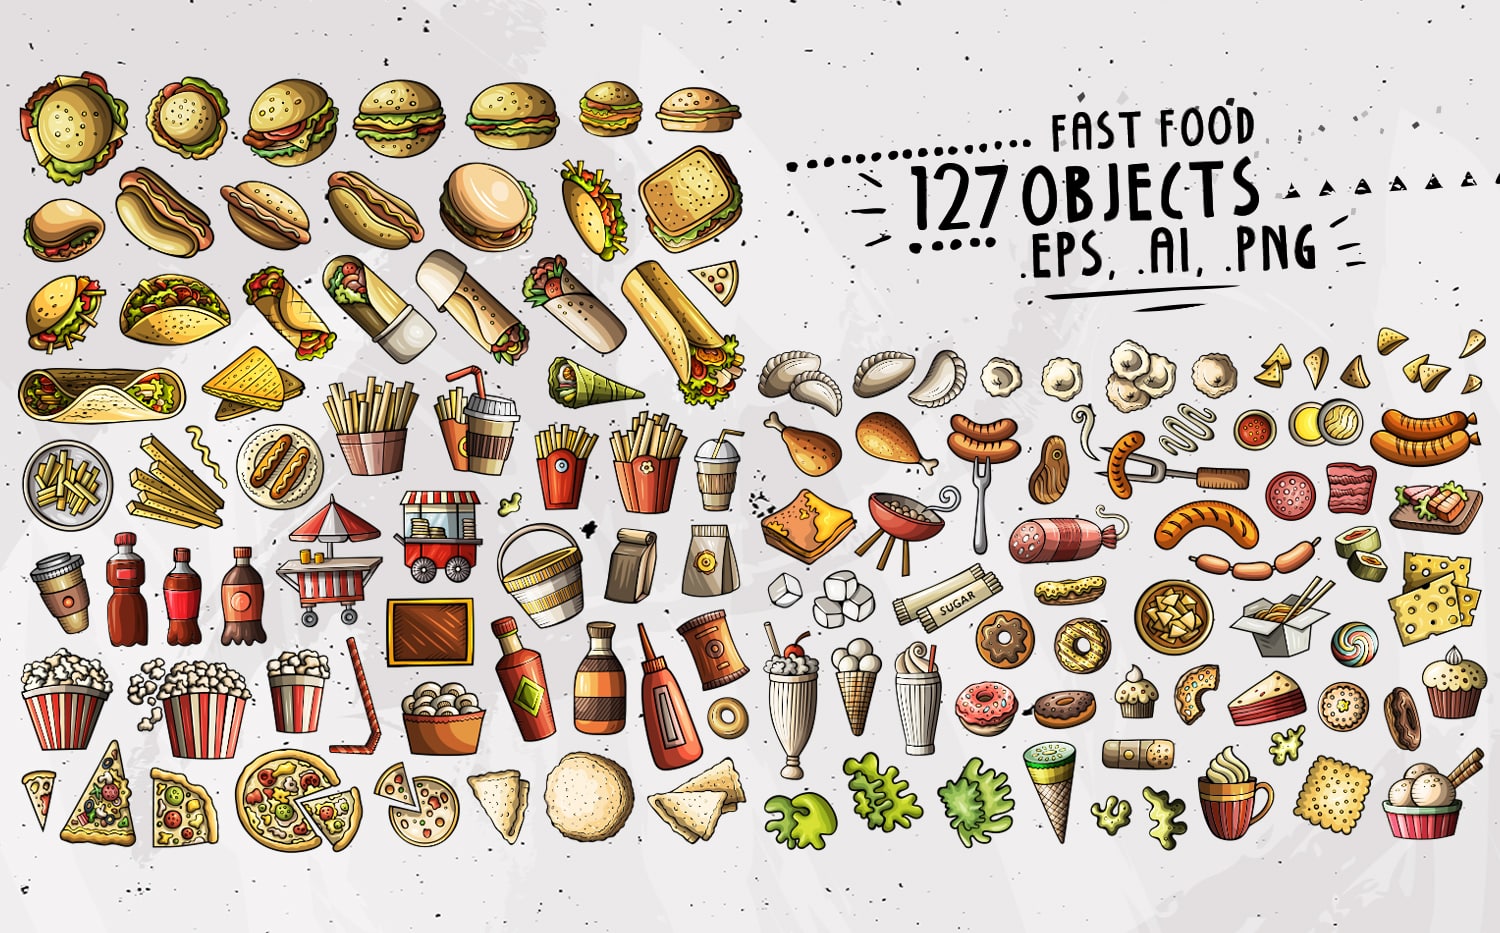 Fast Food Cartoon Doodle Objects Set Vector